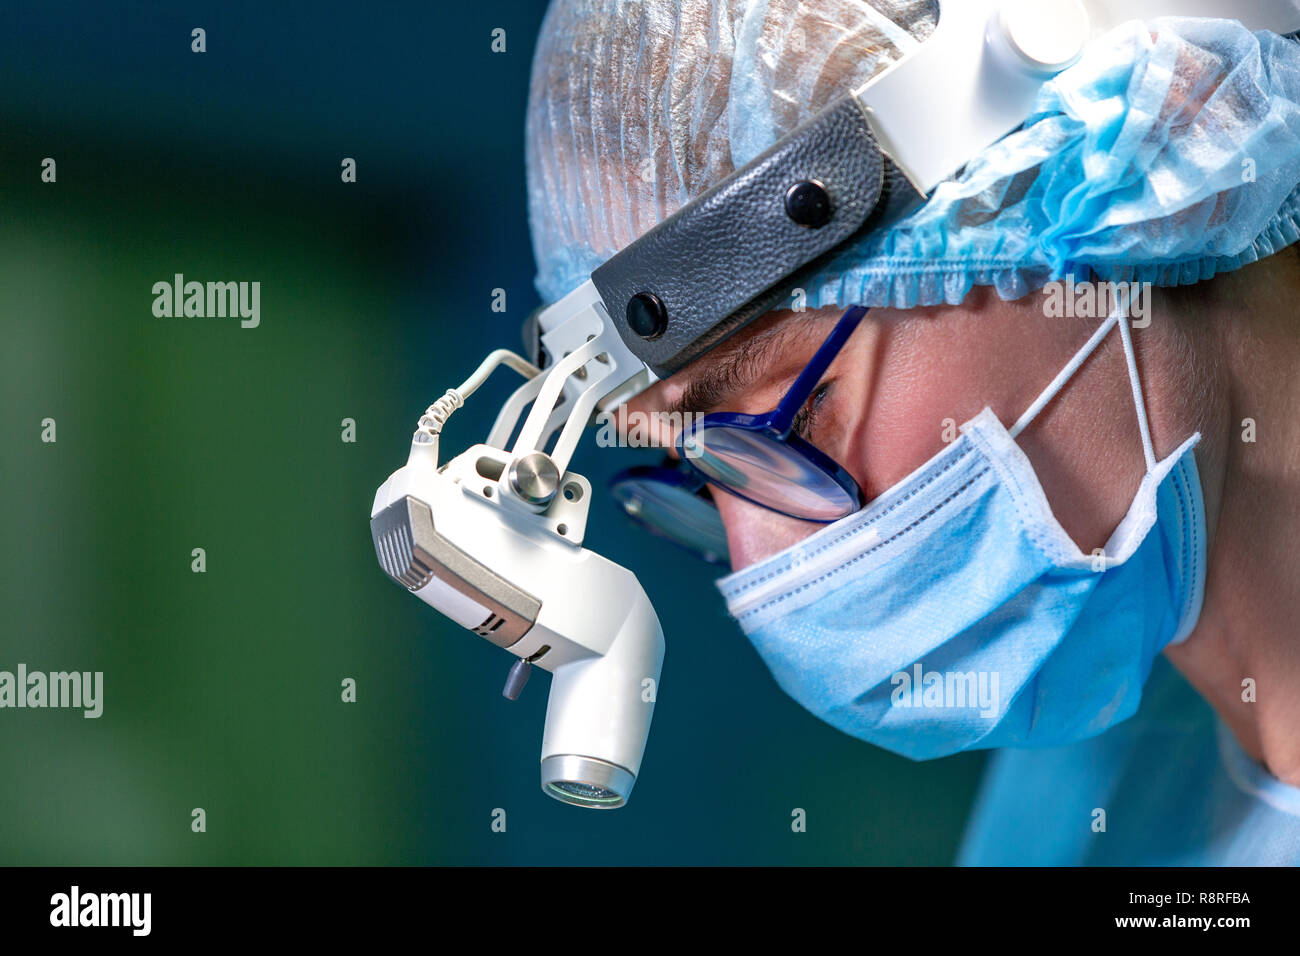 Female Doctor in Surgery Operating Hospital Room. Surgeon medic in protective work wear gloves, mask and cap Stock Photo